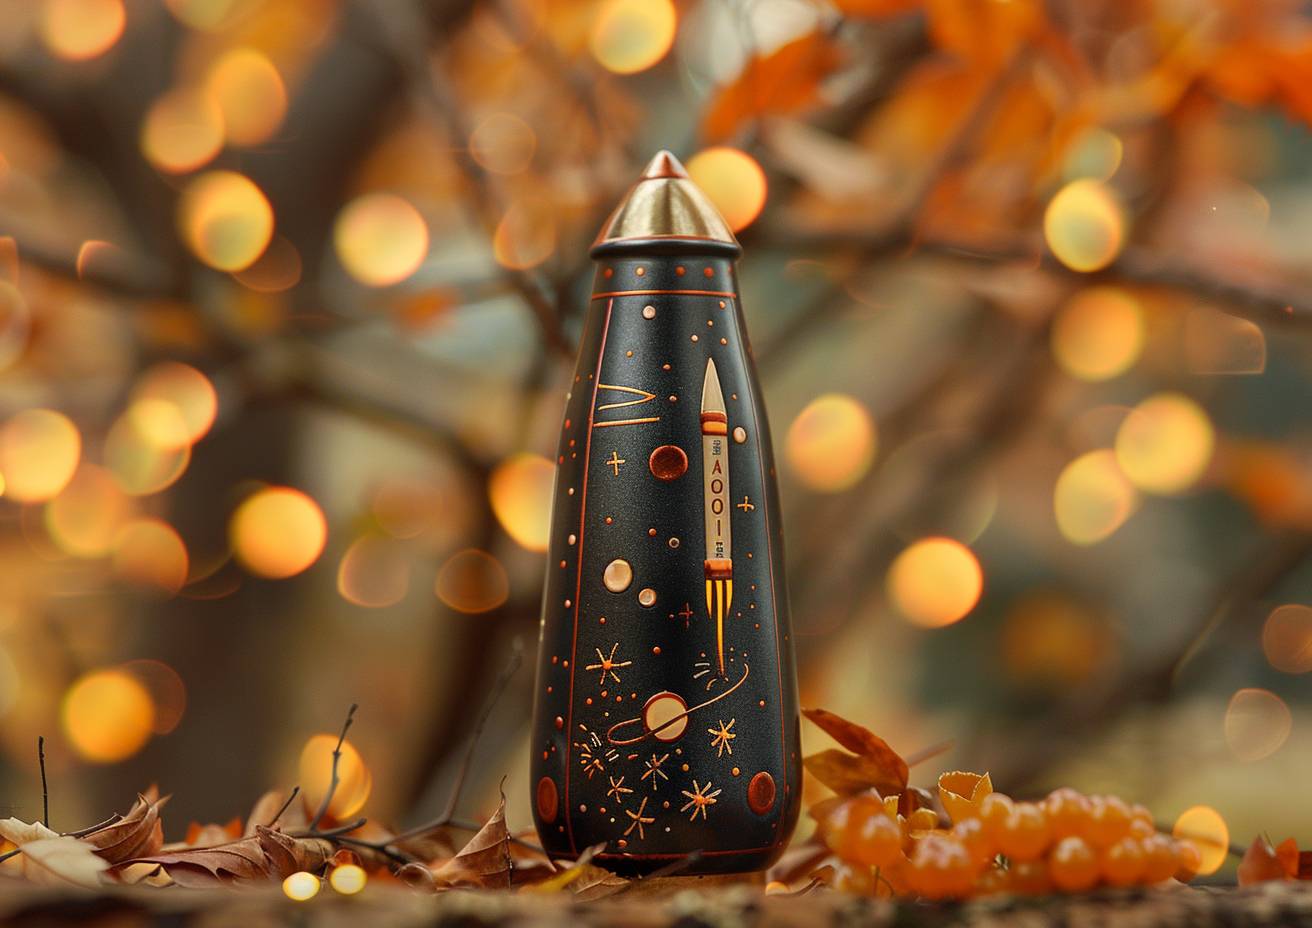 A black-figure storage jar depicting a rocket from the Apollo space program, diffuse lighting, bokeh background